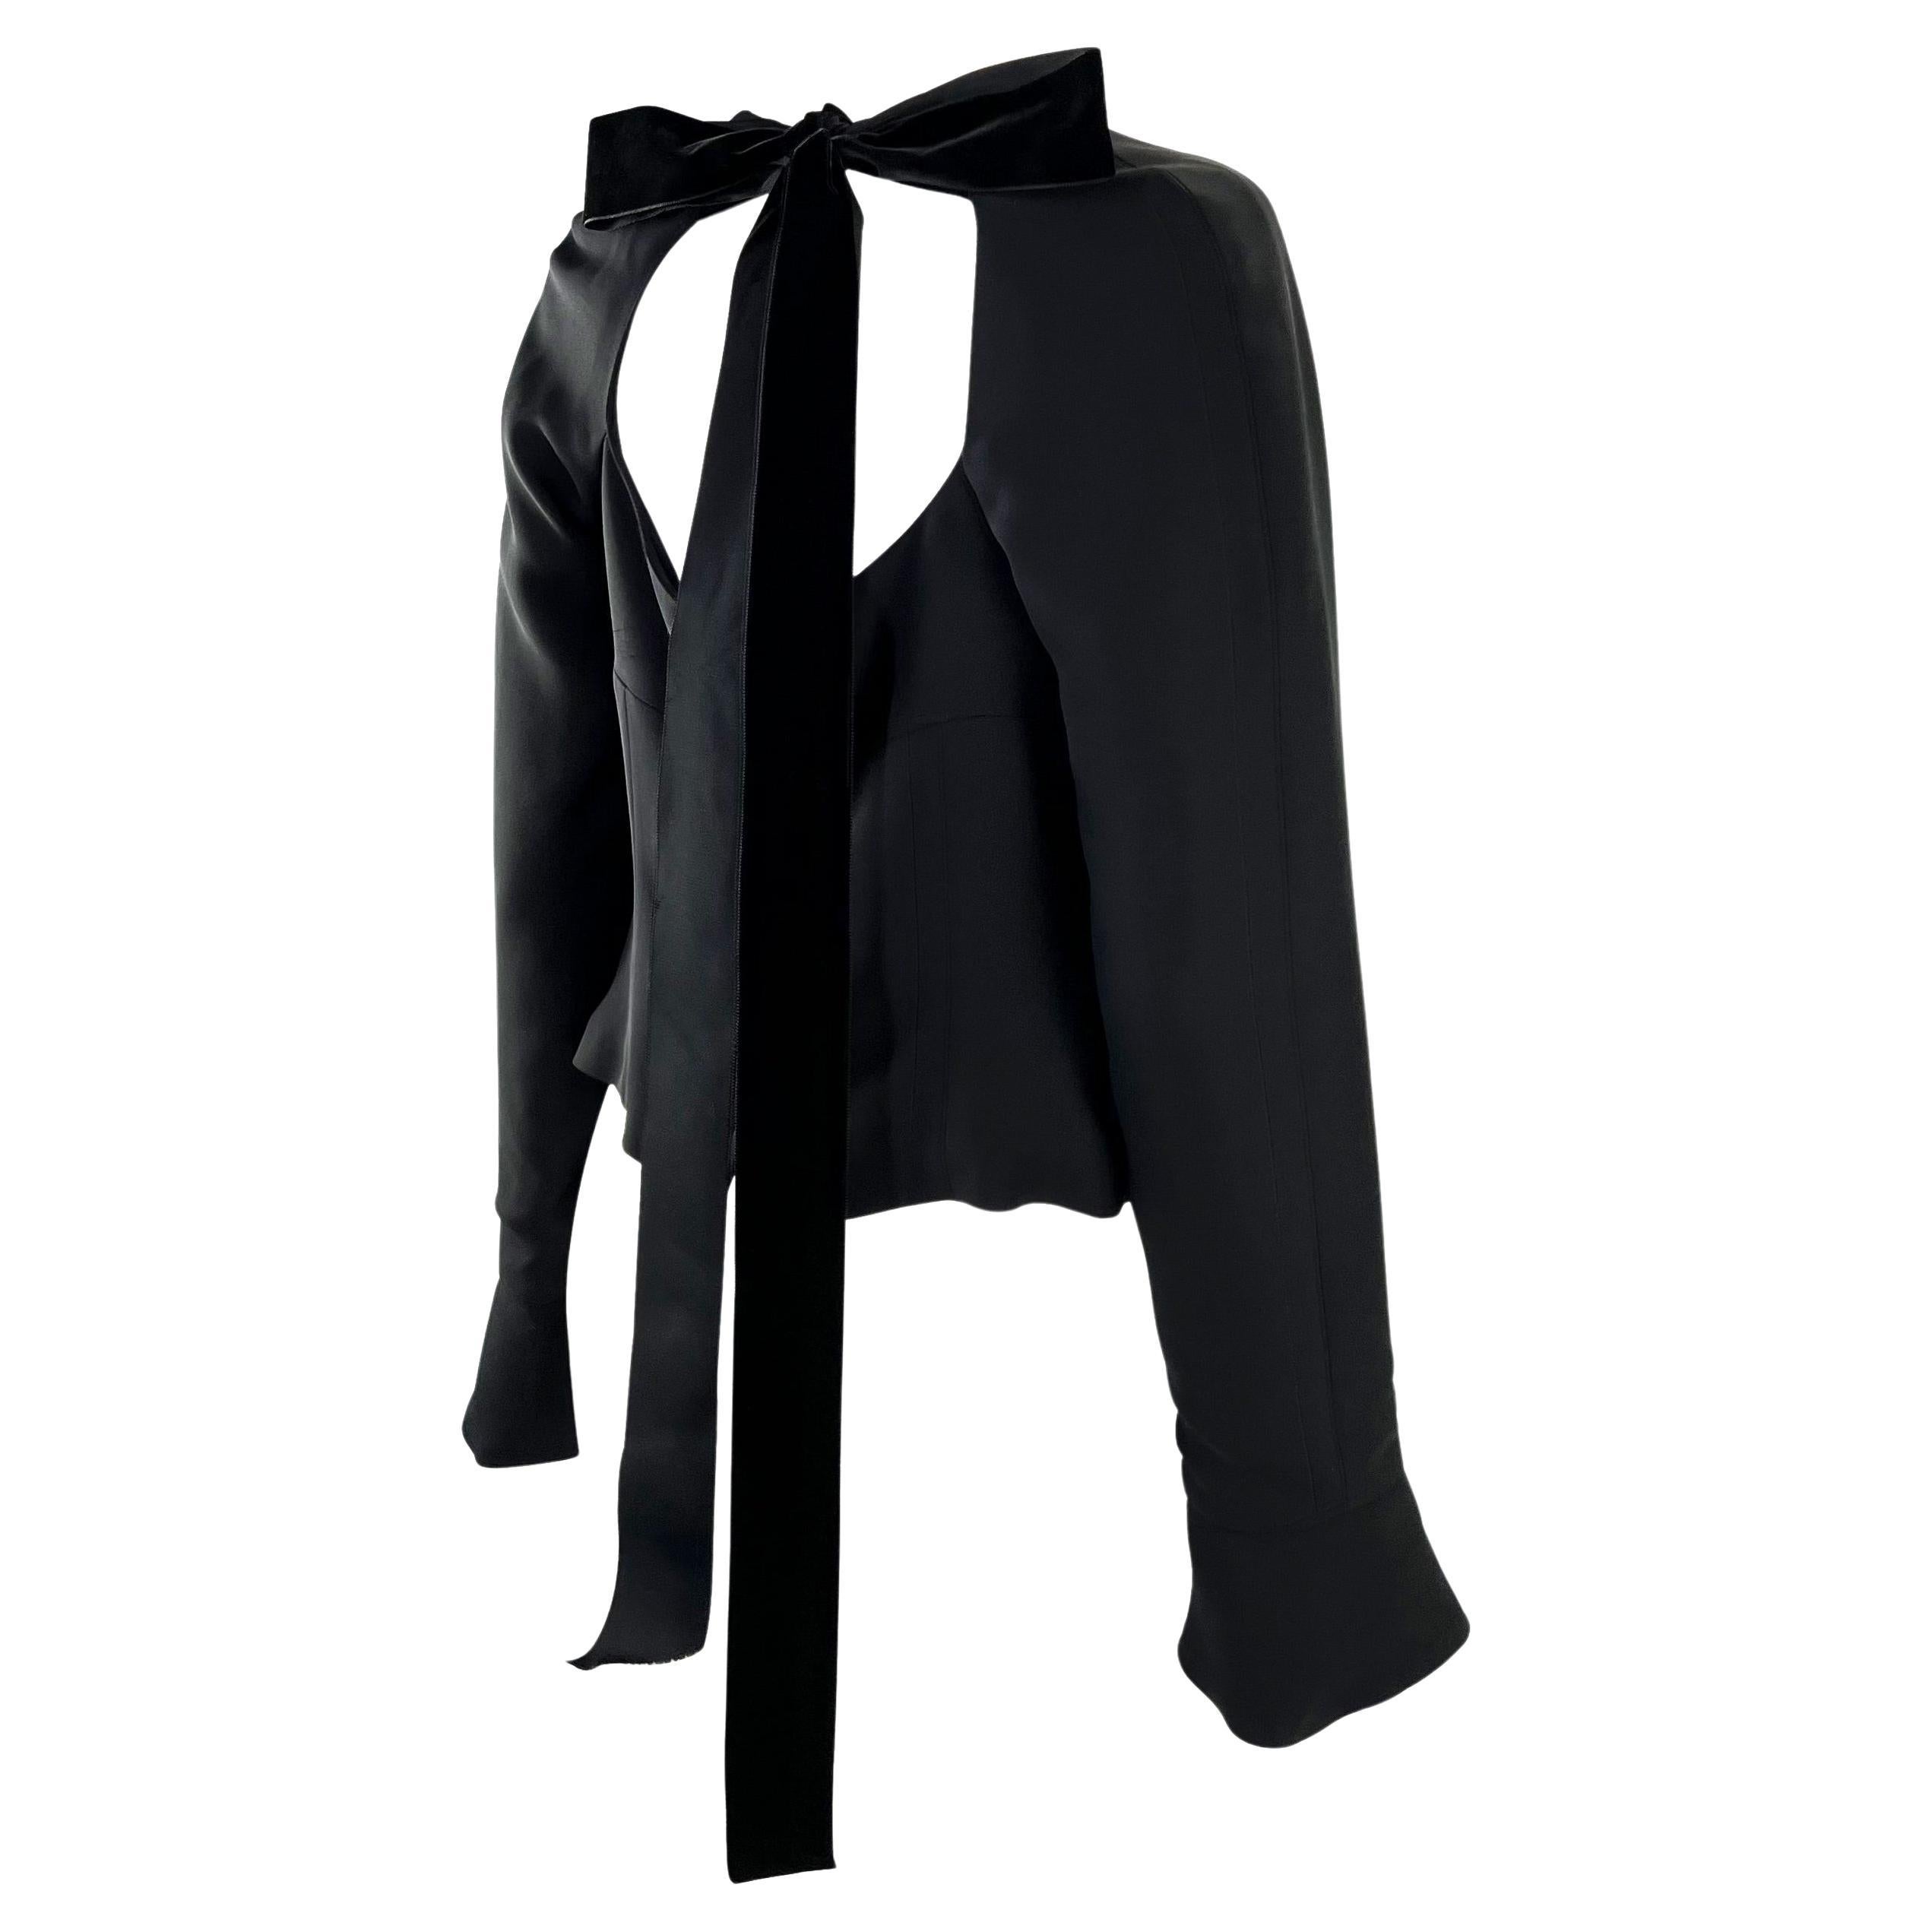 Presenting a timeless Yves Saint Laurent Rive Gauche black blouse, designed by Tom Ford. From the Fall/Winter 2001 collection, this stunning top in black features a fitted body with an open neckline. The sleeves are tailored with a slight bell shape